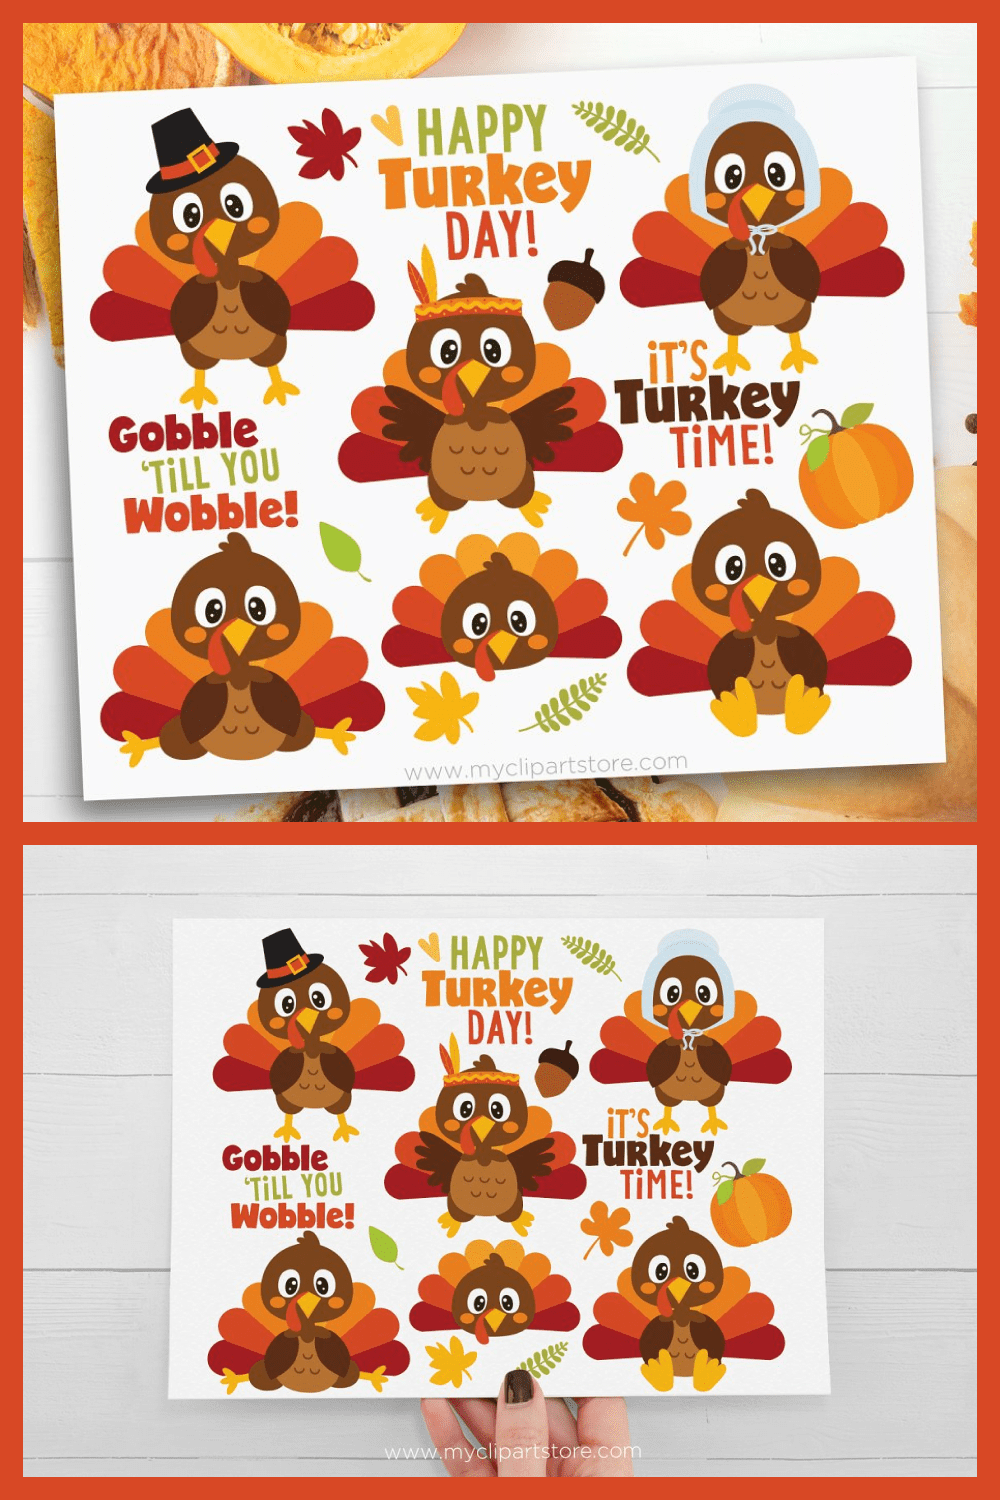 Thanksgiving, turkey day clipart by MyClipArtStore.